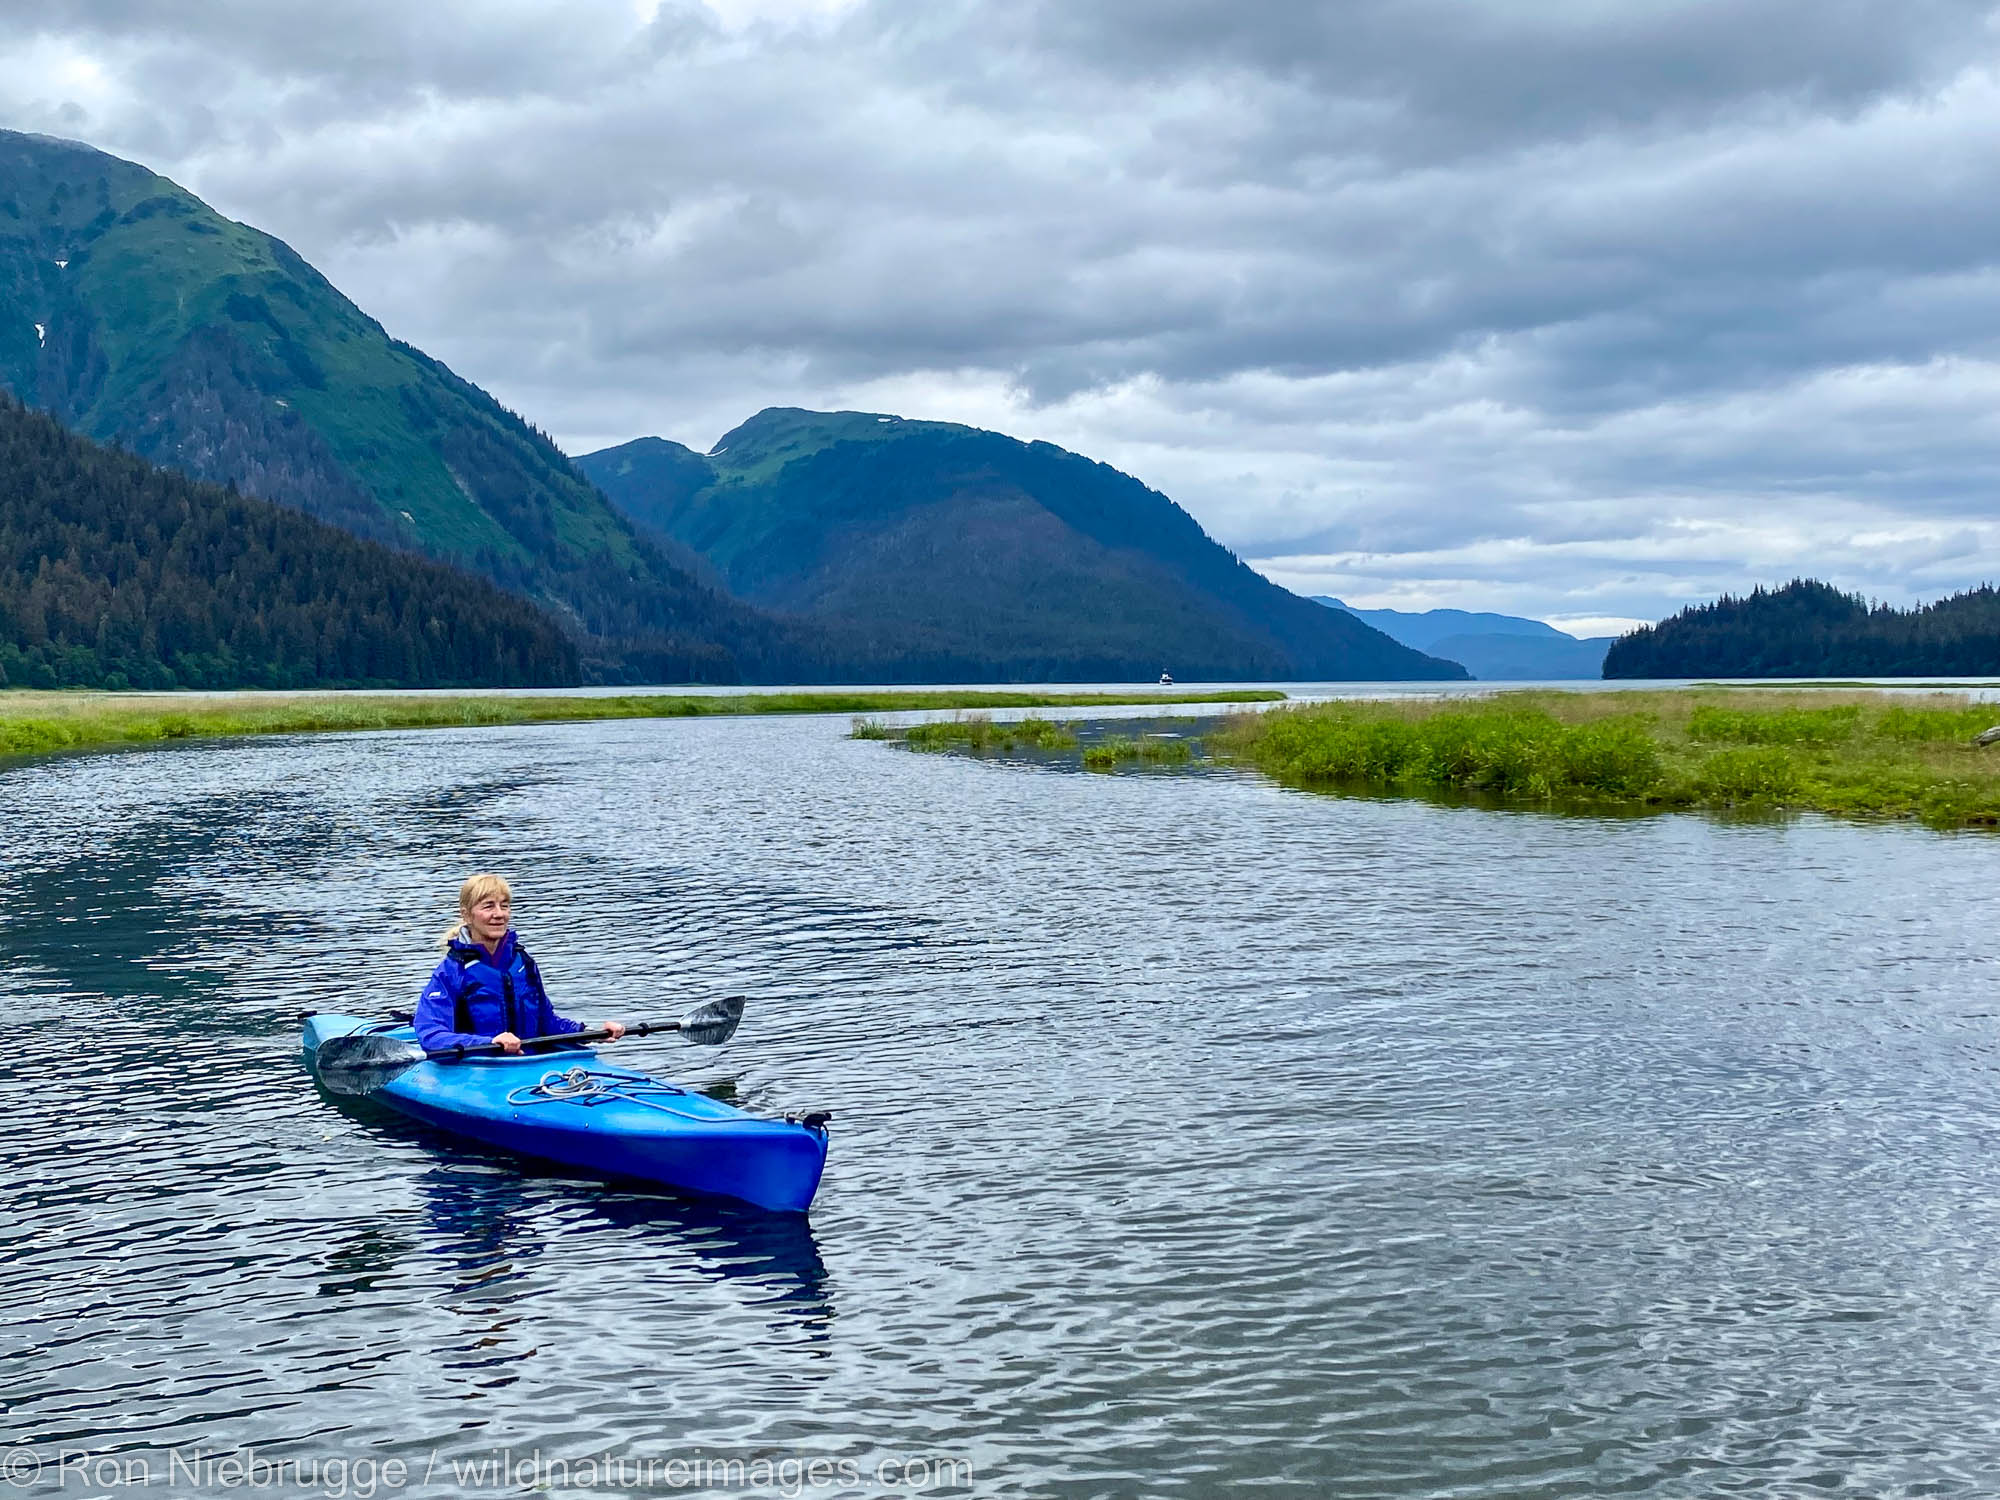 Kayaking in Windfall Harbor, Tongass National Forest Inside Passage, Alaska.   Iphone photo.